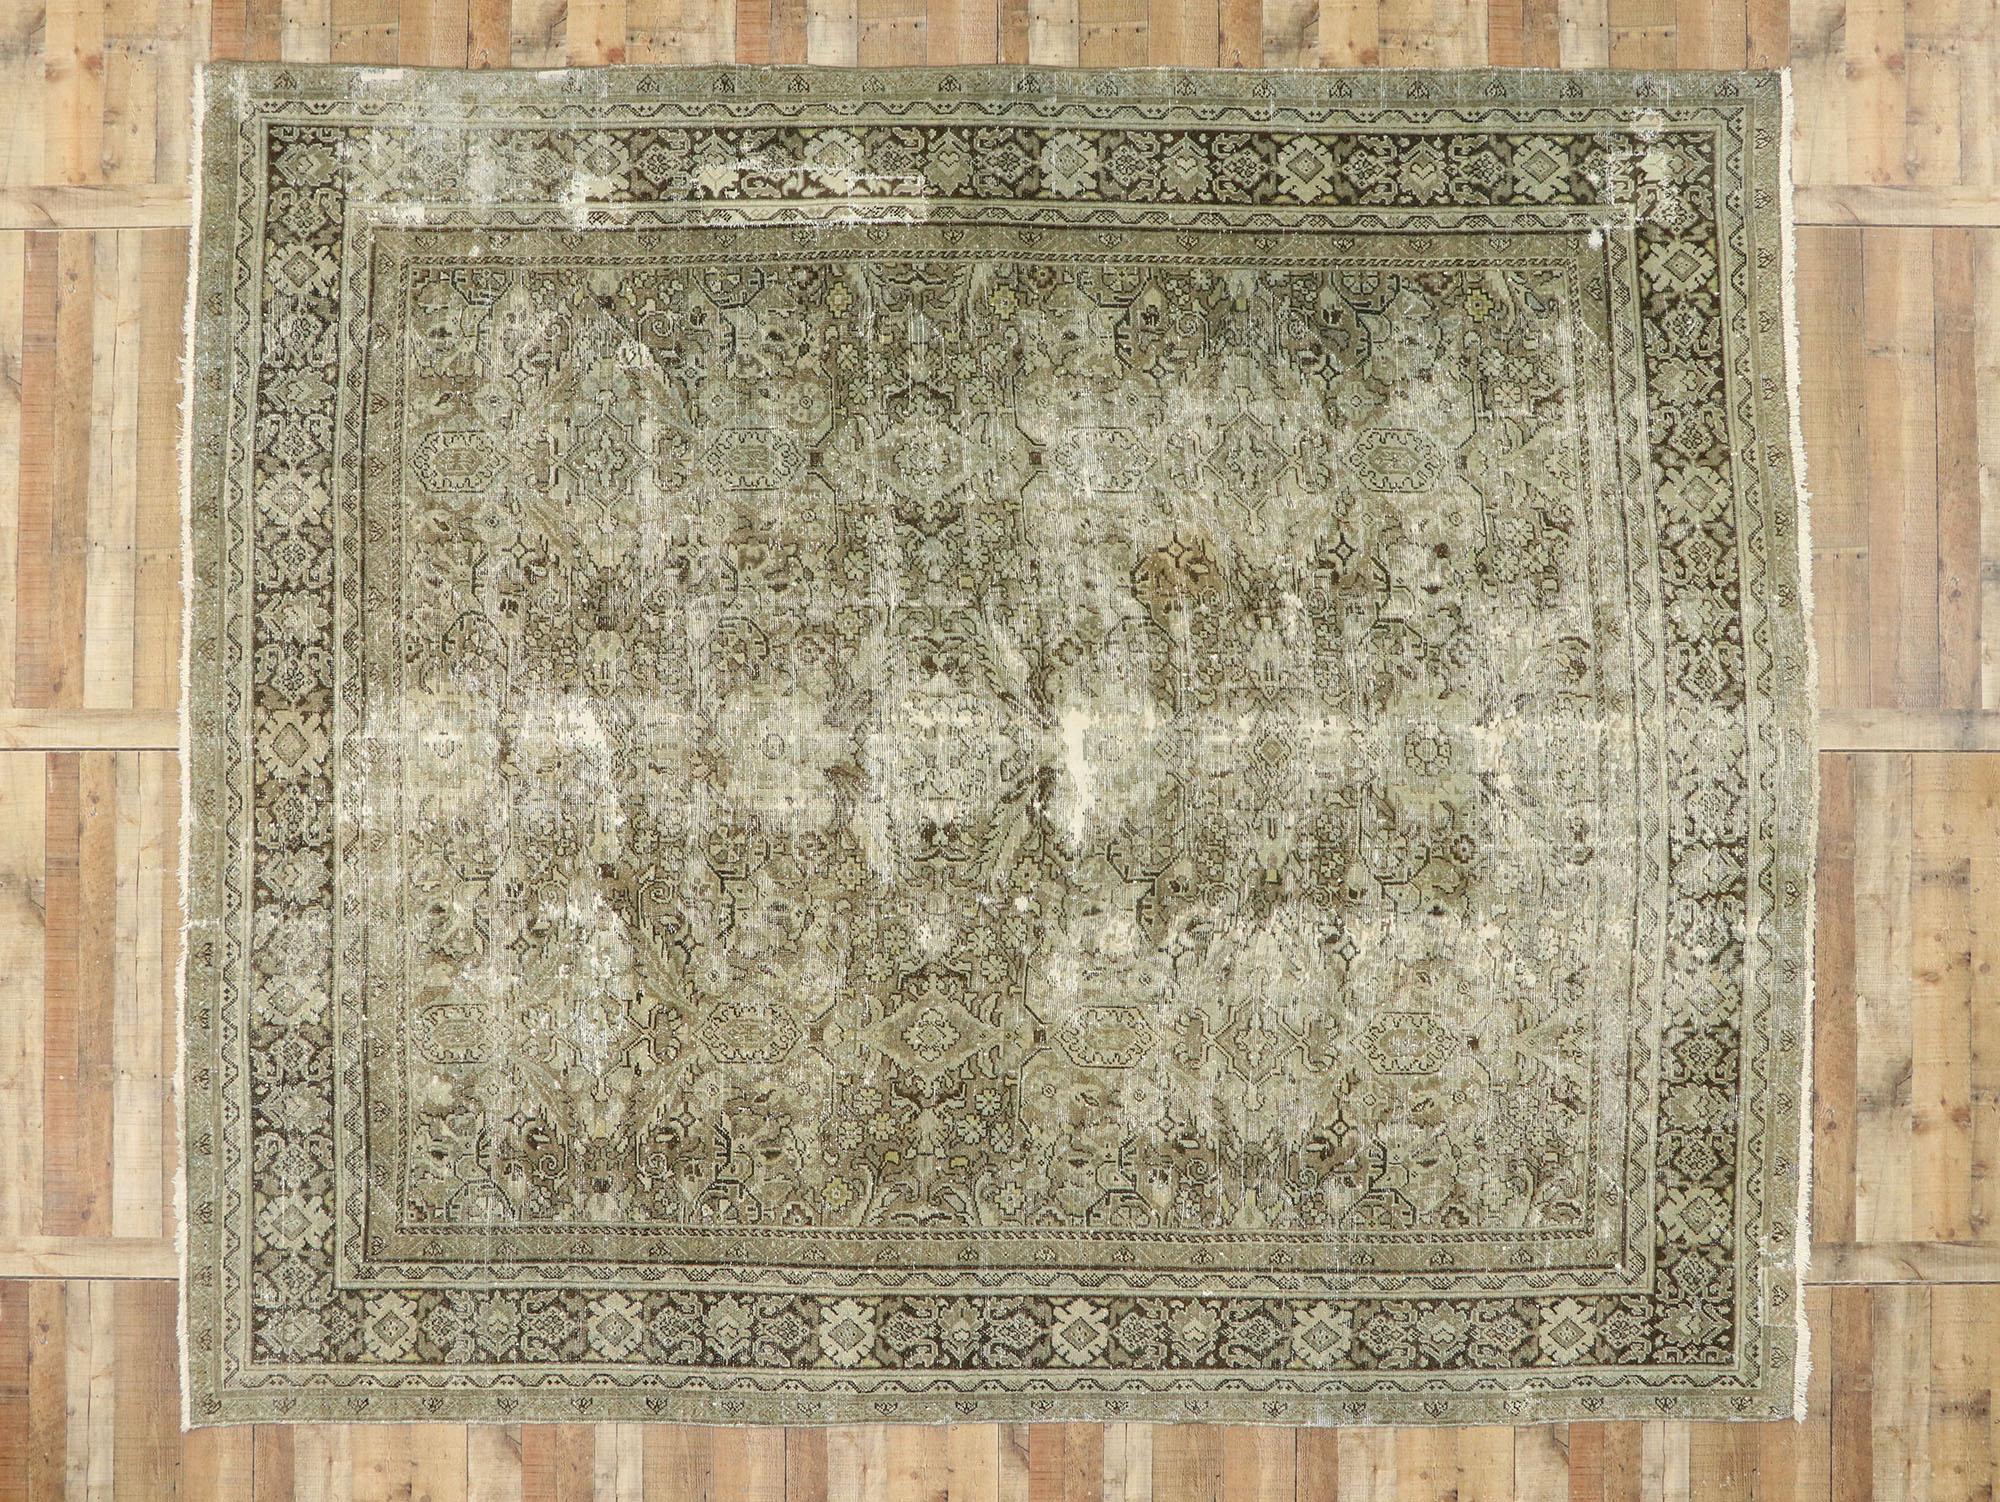 19th Century Antique-Worn Persian Mahal Rug, Relaxed Refinement Meets Earth-Tone Elegance